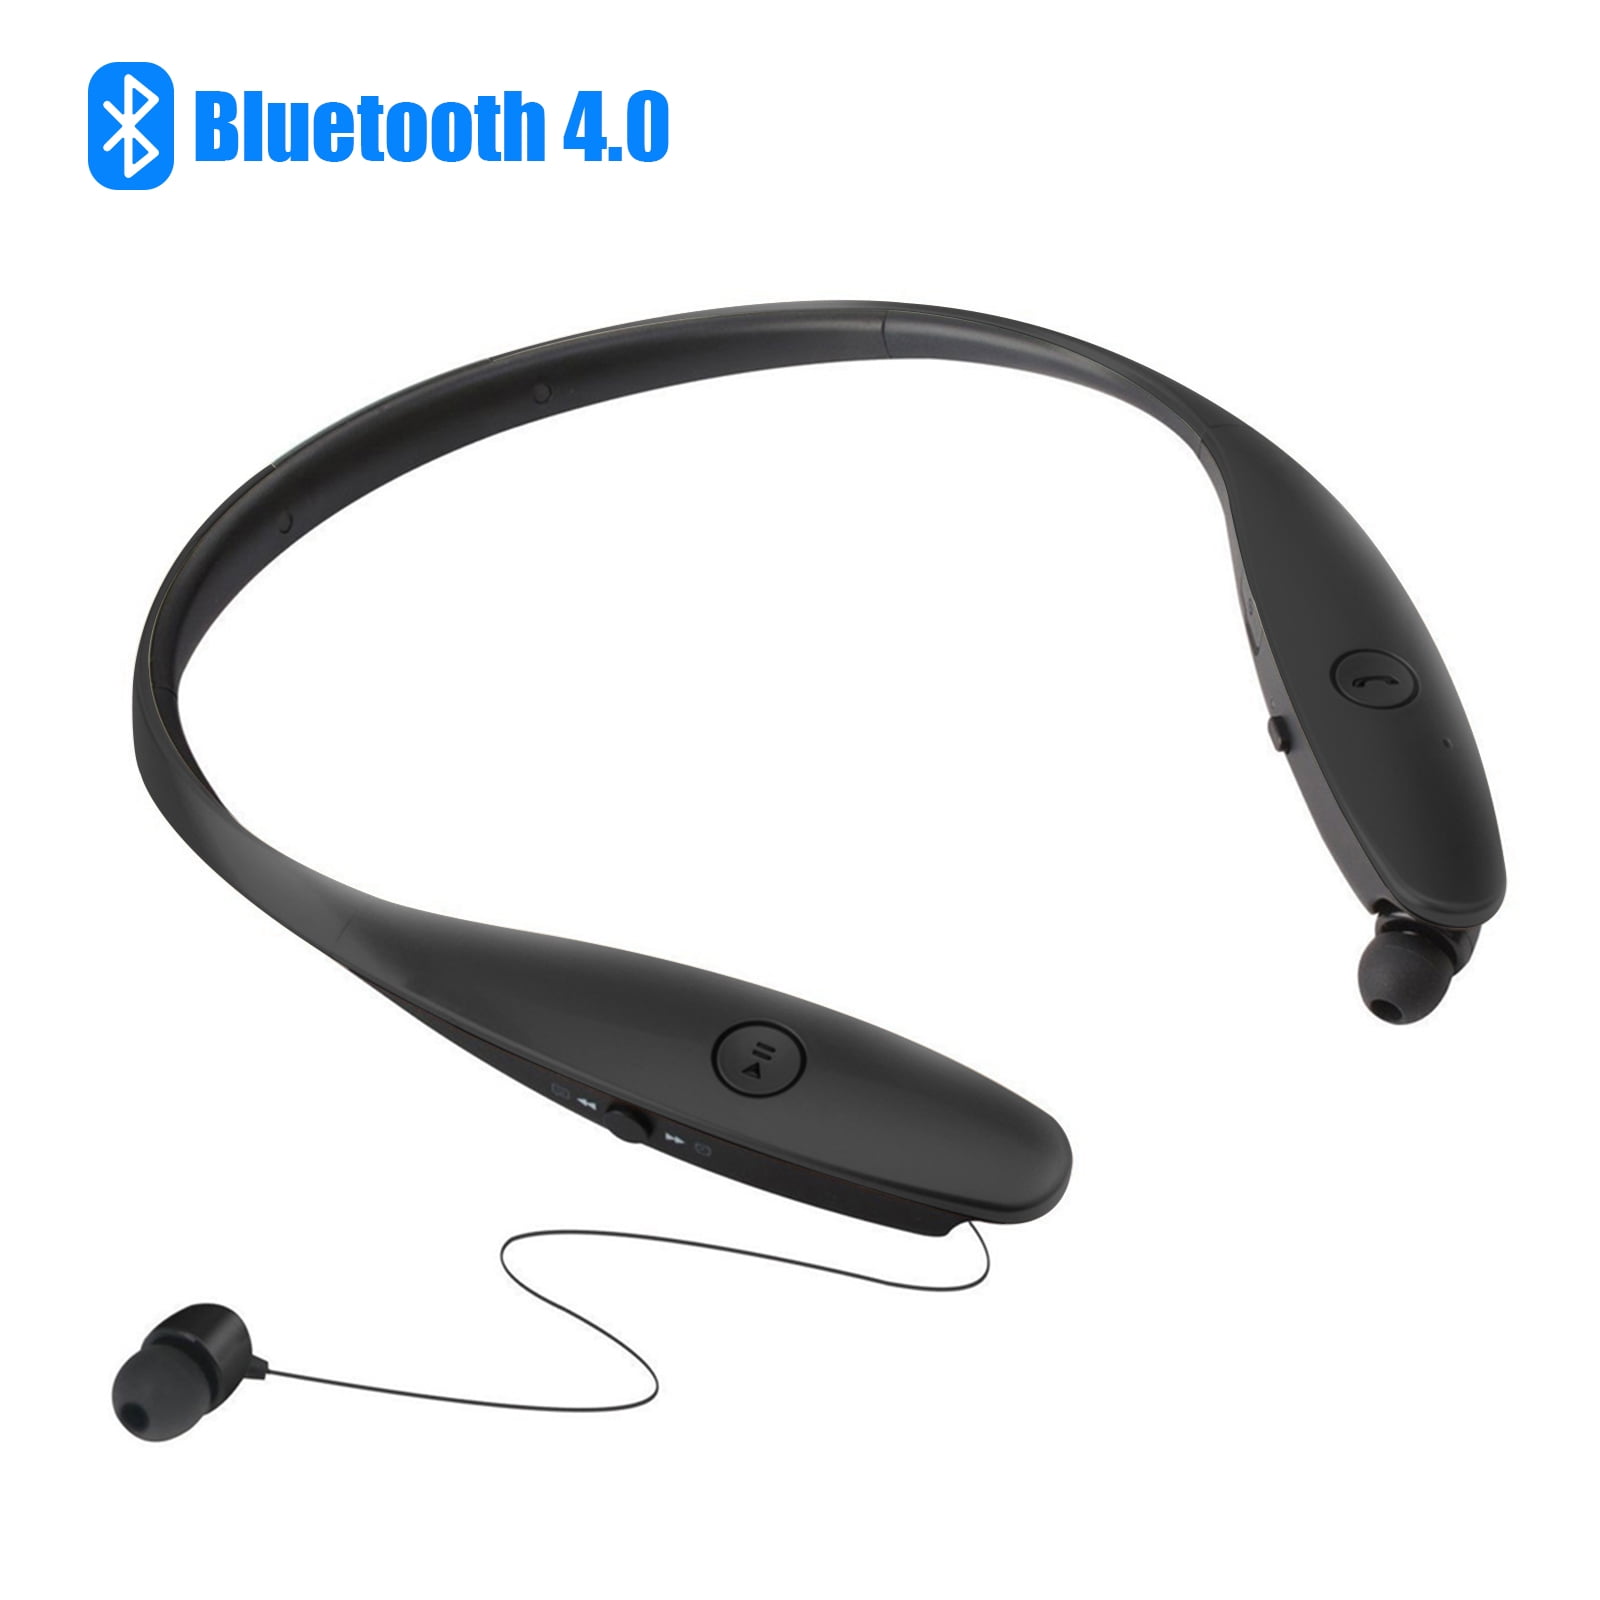 Bluetooth Headphones Wireless Neckband Headset - Sweatproof Sports Earphones with Noise Cancelling Mic, Retractable Earbud and 10 Hours Play Time For iPhone 11/11 Pro Android Cellphone Tablets TV